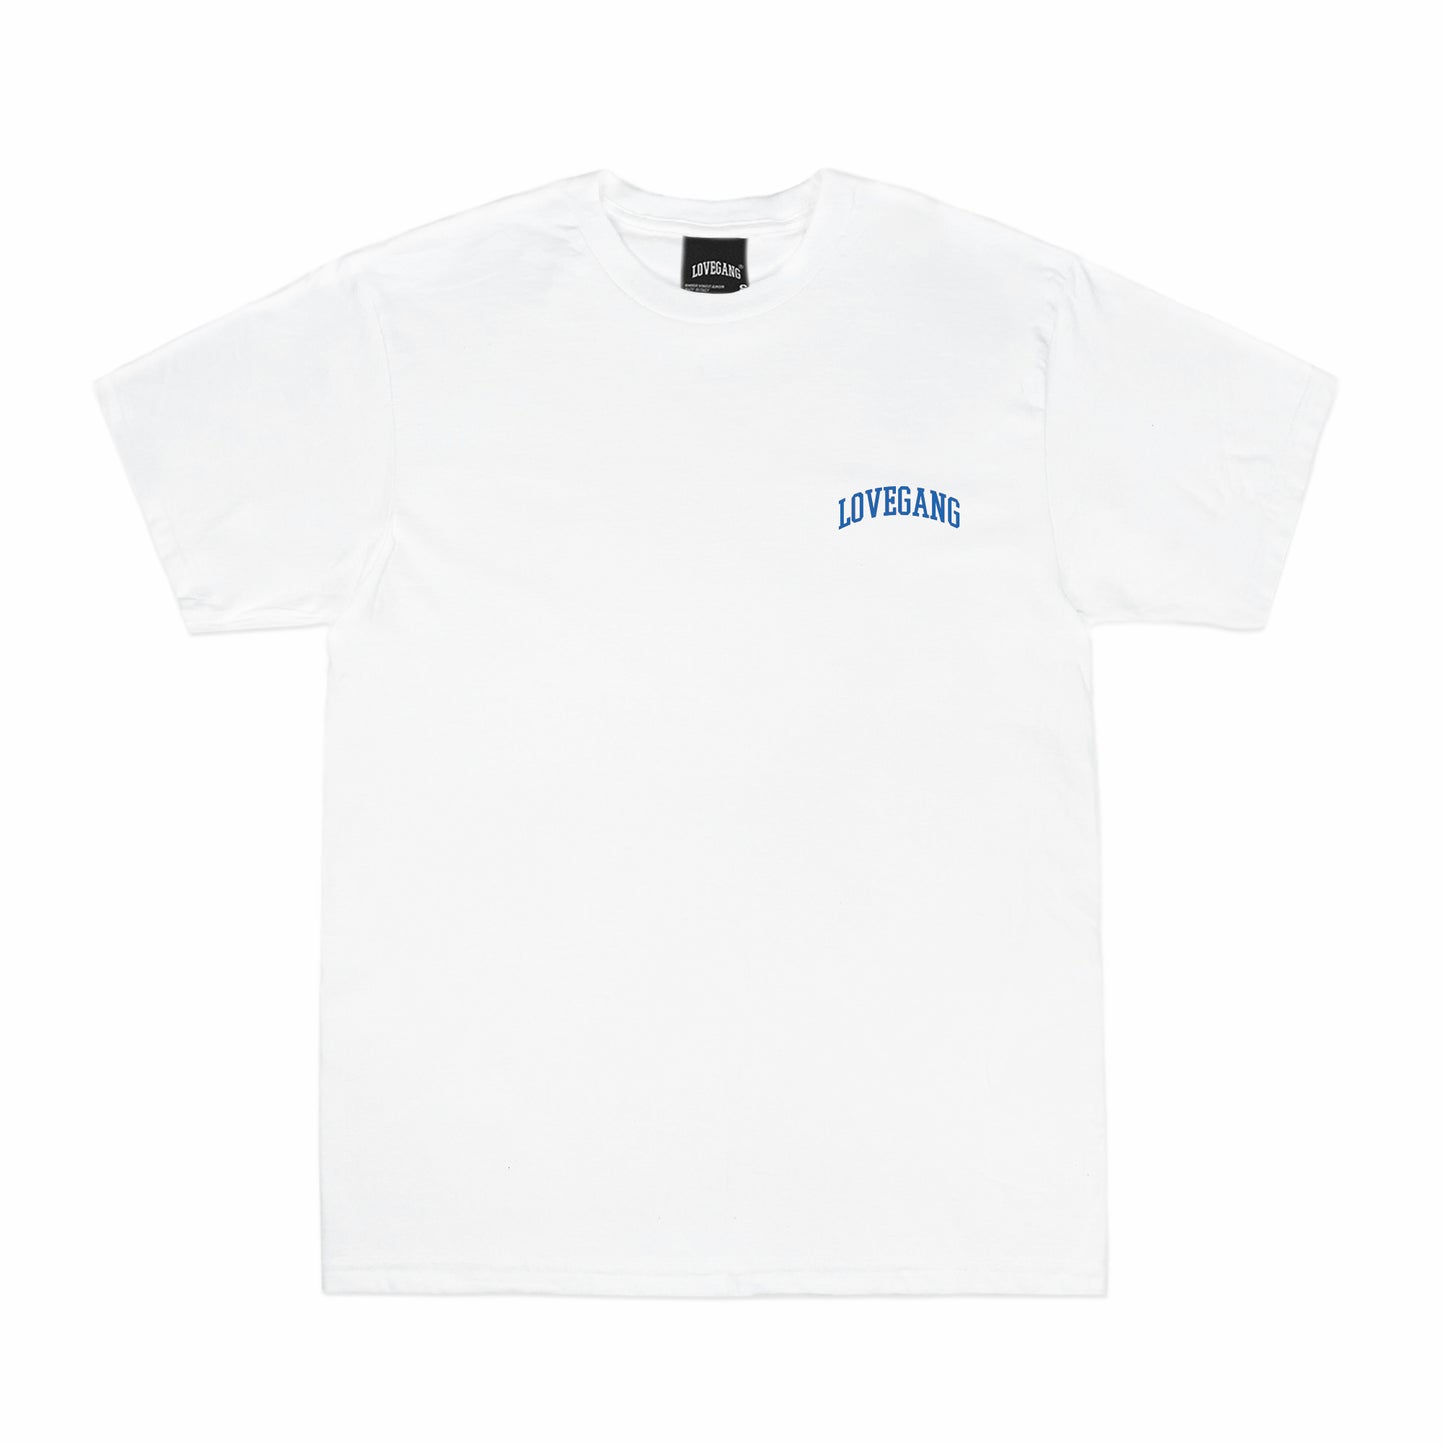 COLLEGE S/S '22 - T-SHIRT (WH)